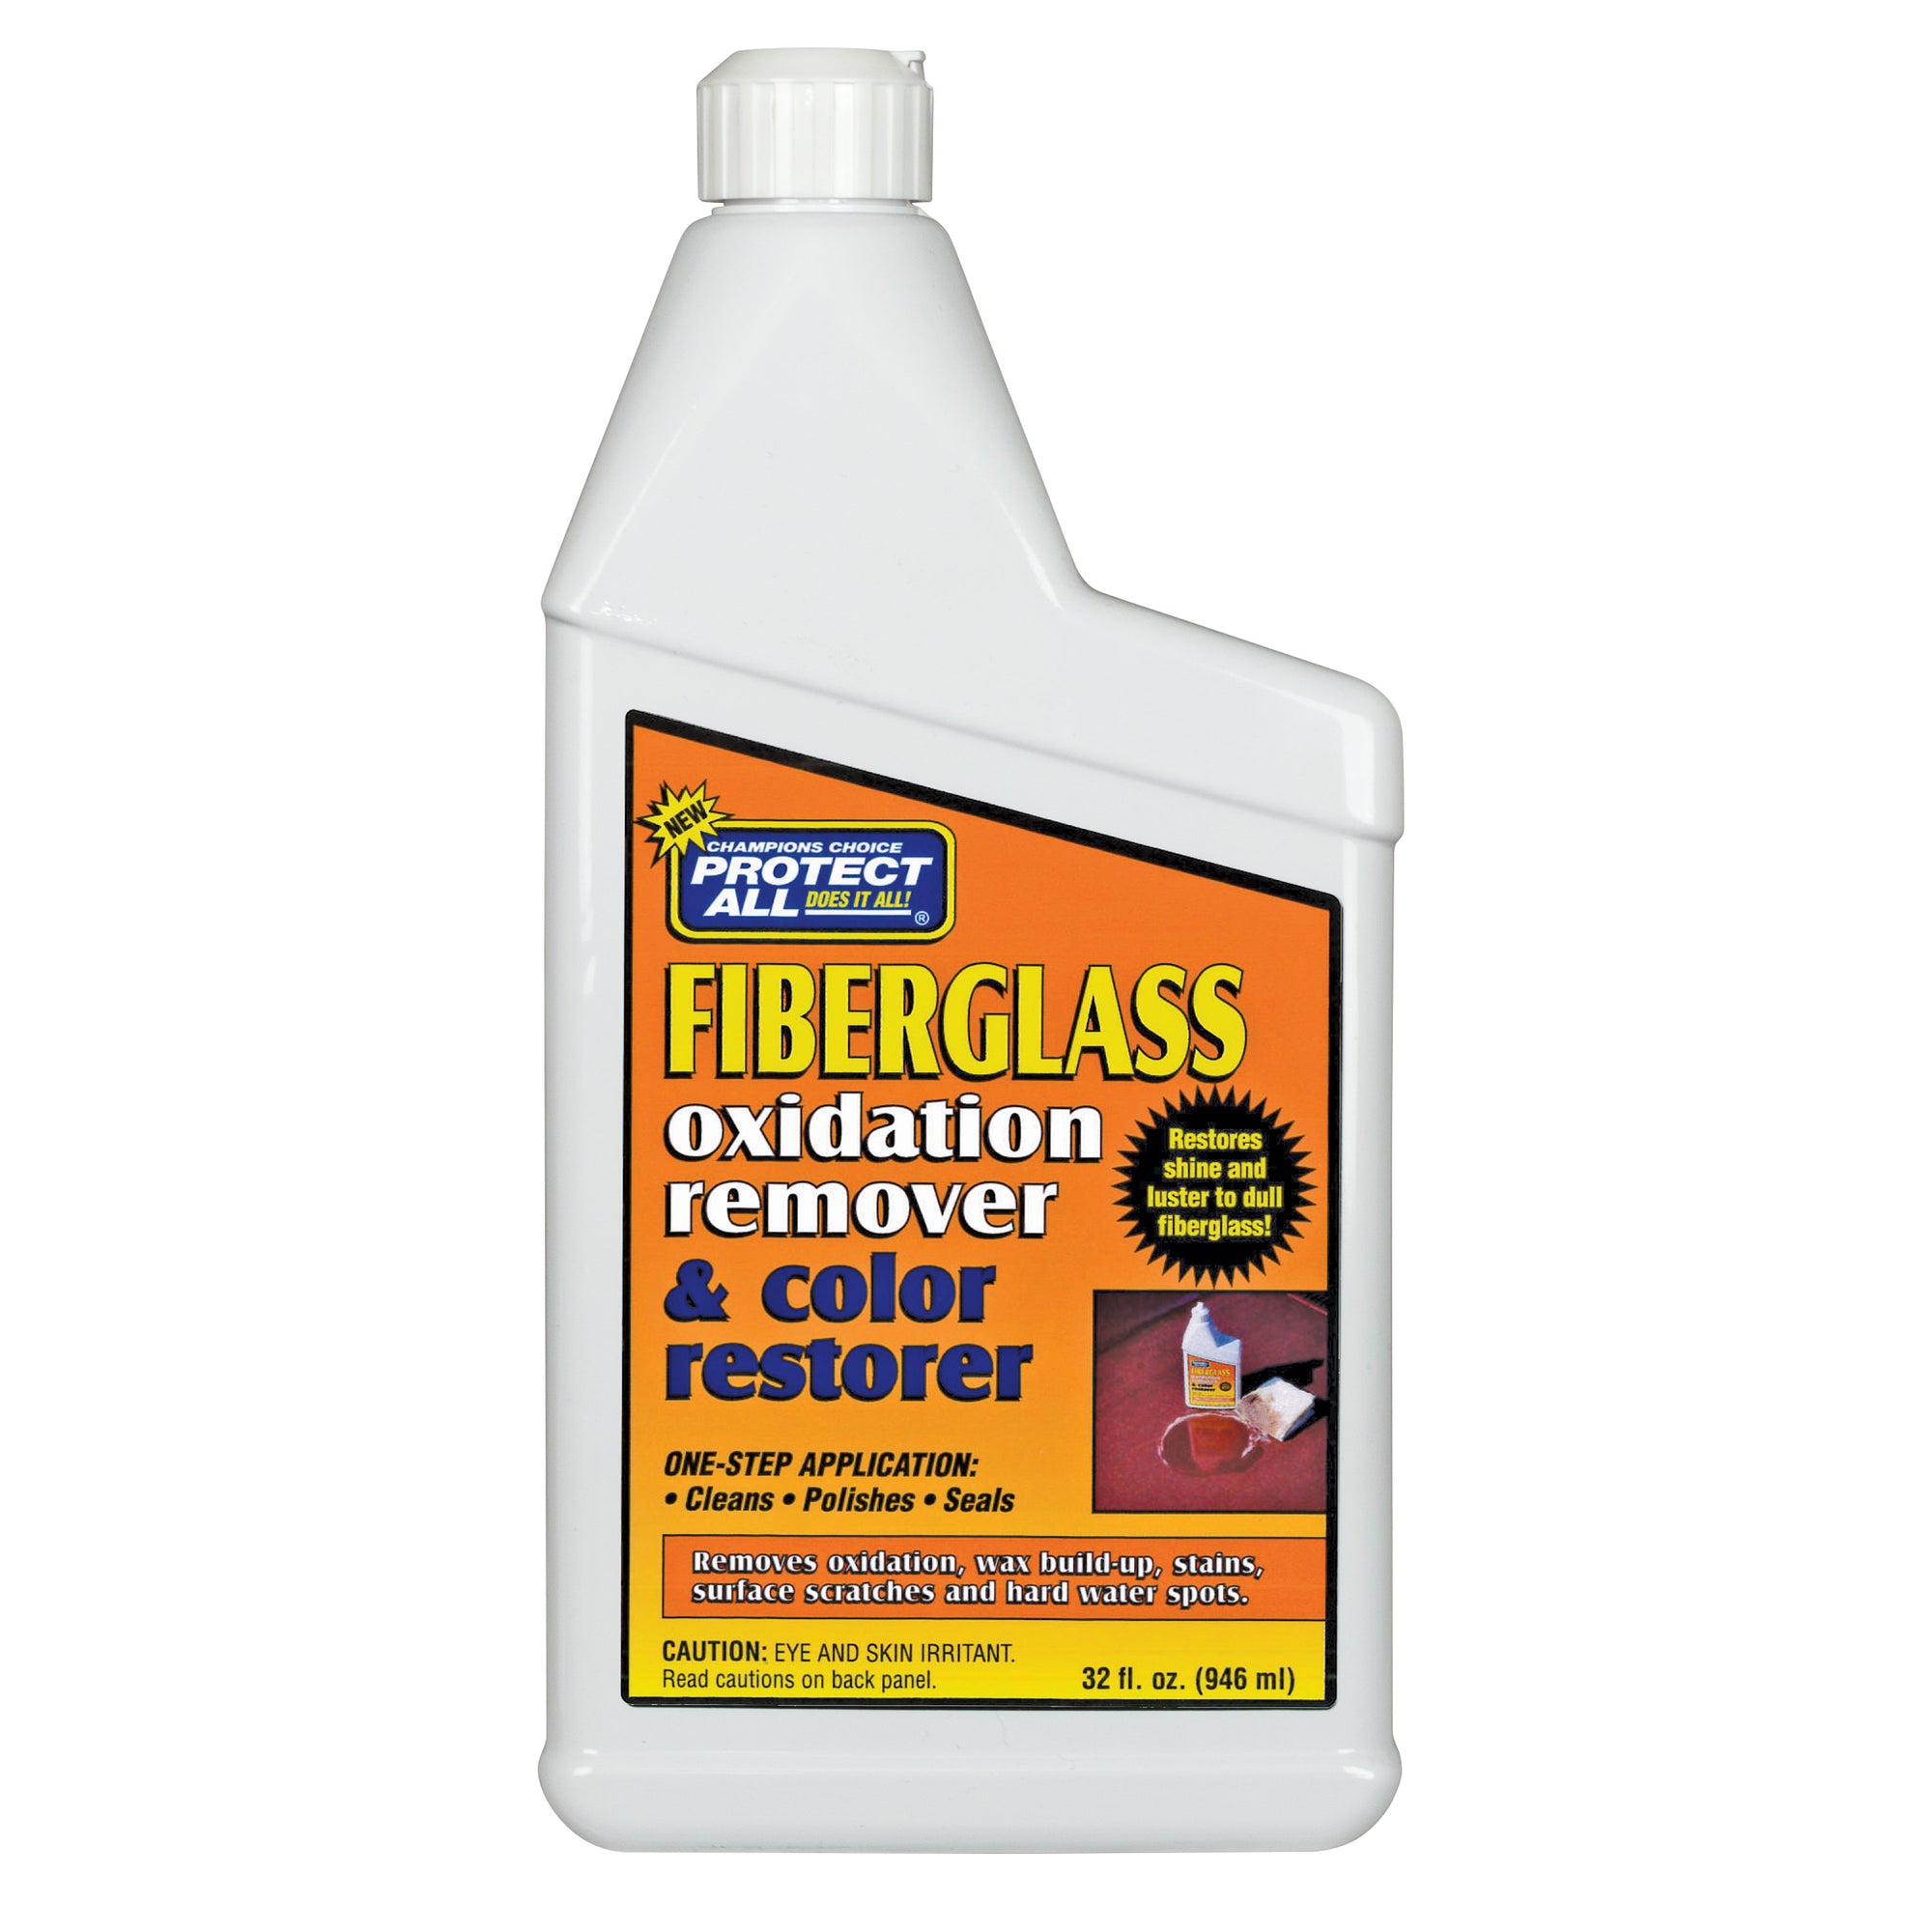 Thetford 55032 Protect All Fiberglass Oxidation Remover and Color Restorer - 32 oz. Bottle